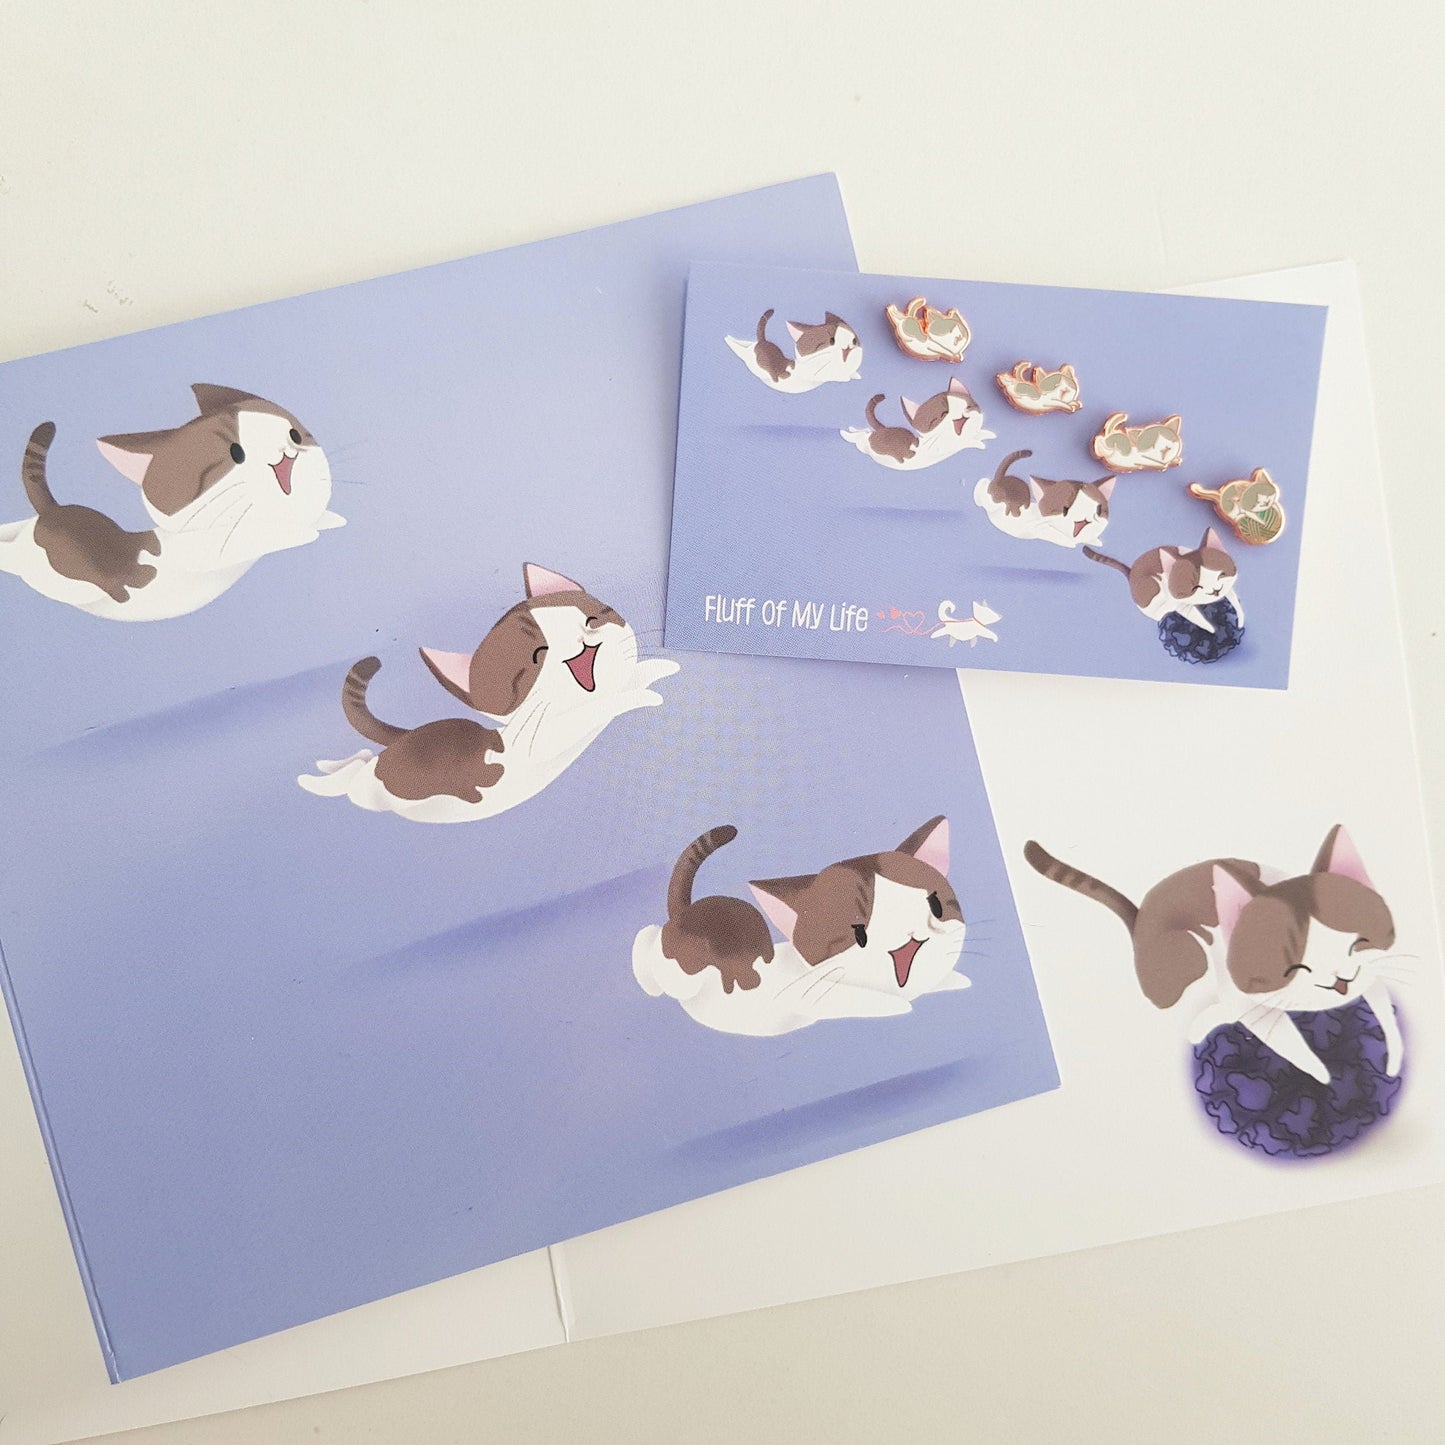 Mac the Special Needs Cat & Crinkleball, Special Fluffs Greeting Card Collection (Any Occasion, Cat Illustration ), Greeting Cards/Postcards, Greeting & Note Cards